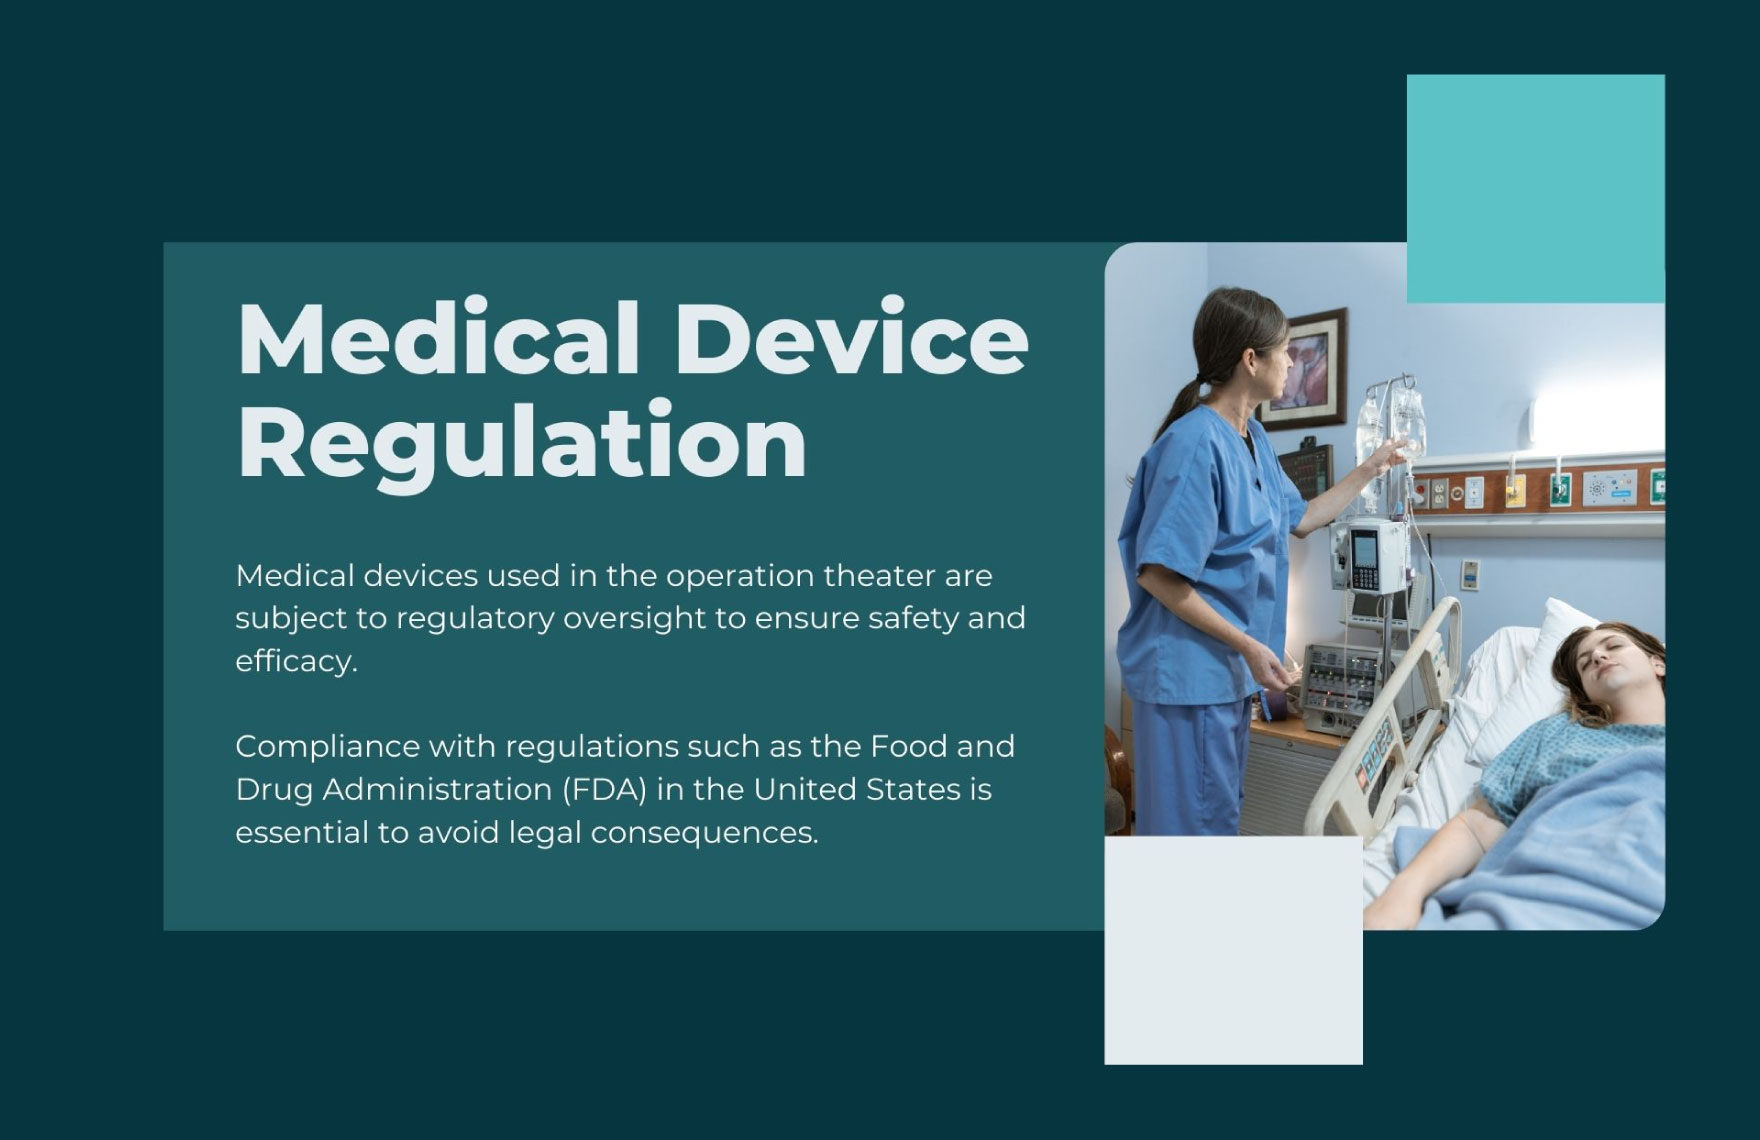 Legal Aspects in Operation Theater Template